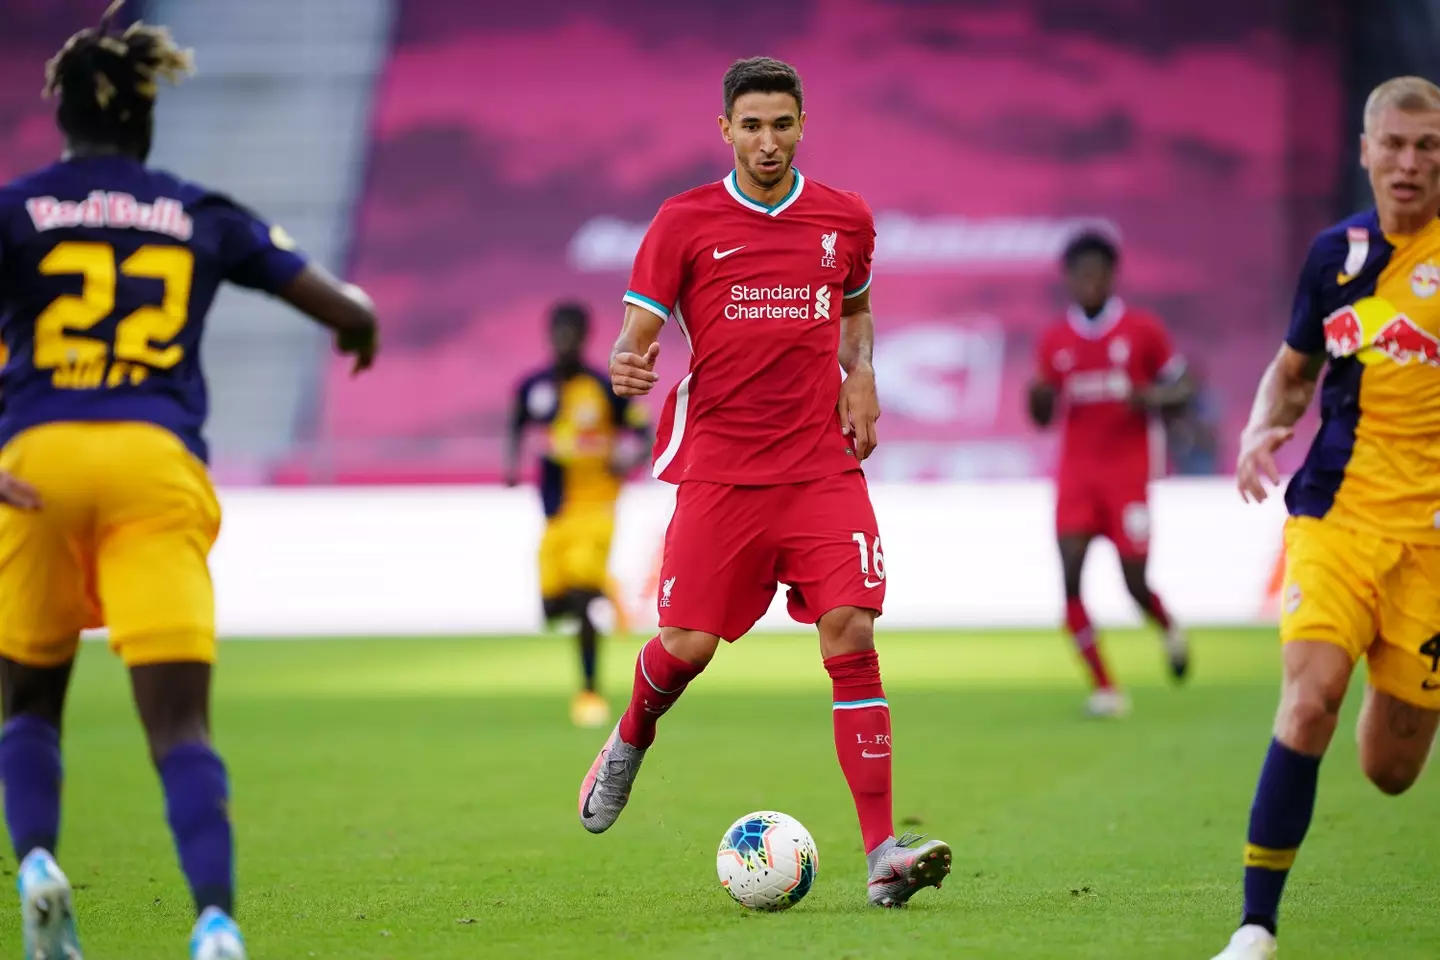 Marko Grujic in action for Liverpool in 2020. (Image: Getty)